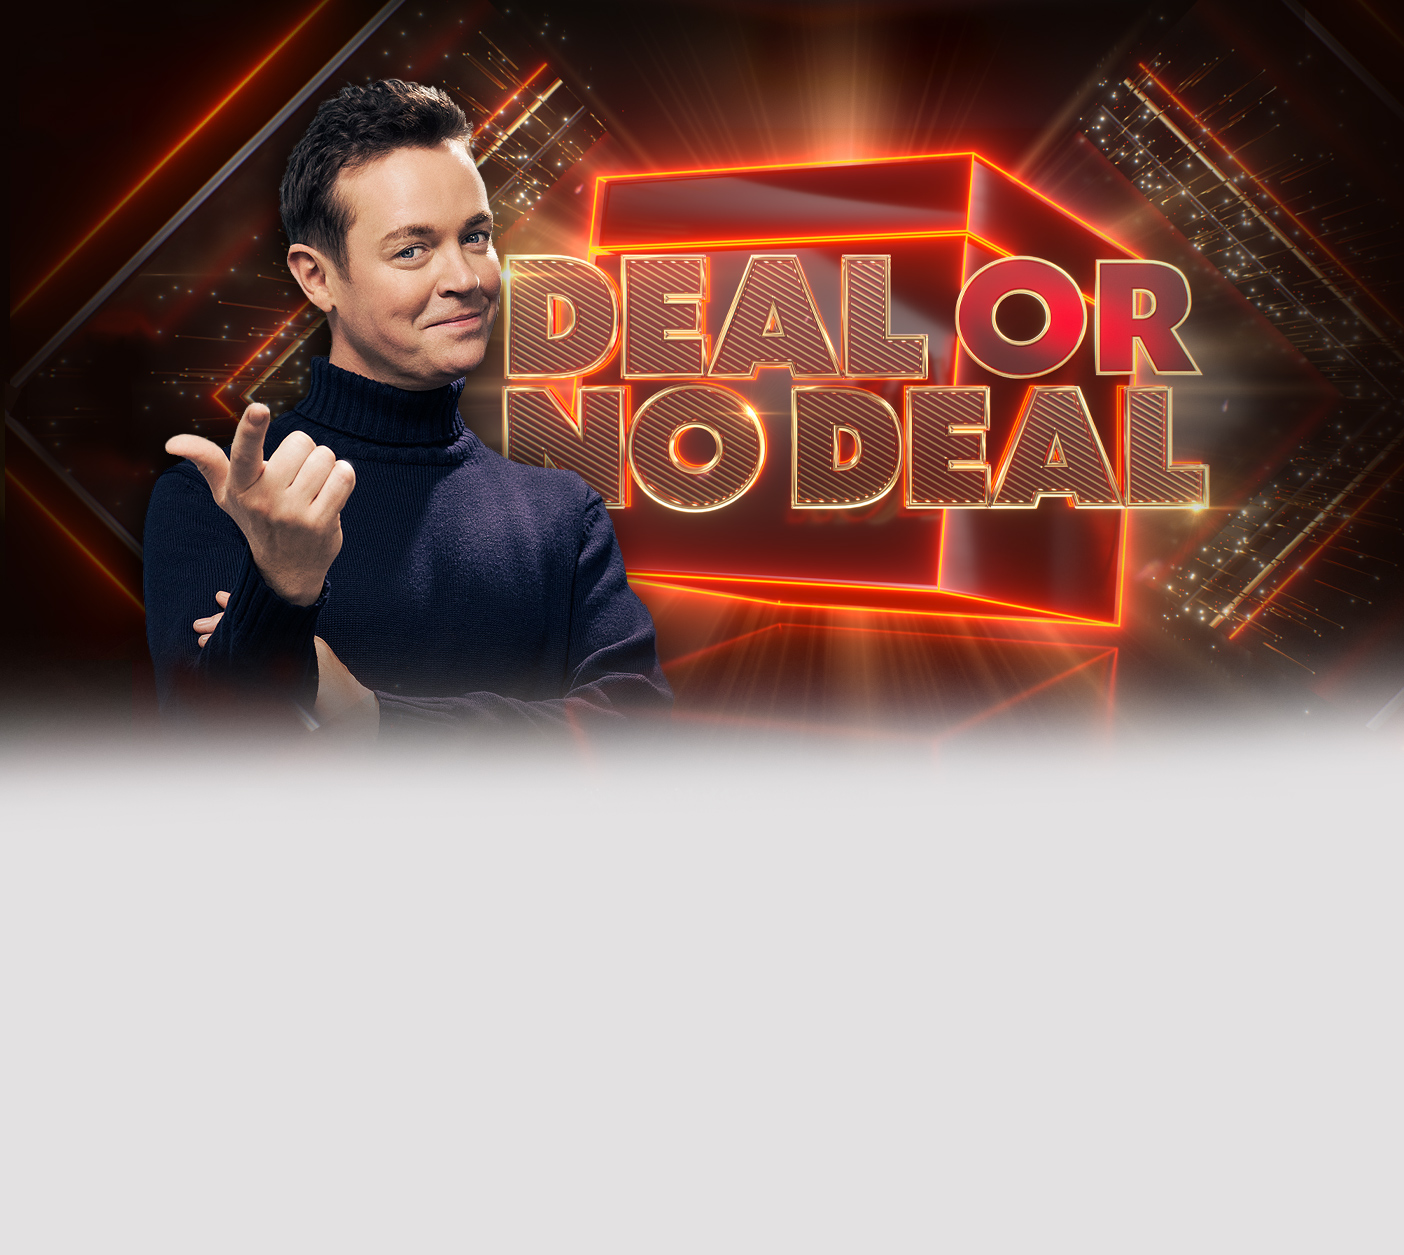 Book Tickets For Deal Or No Deal | Applausestore